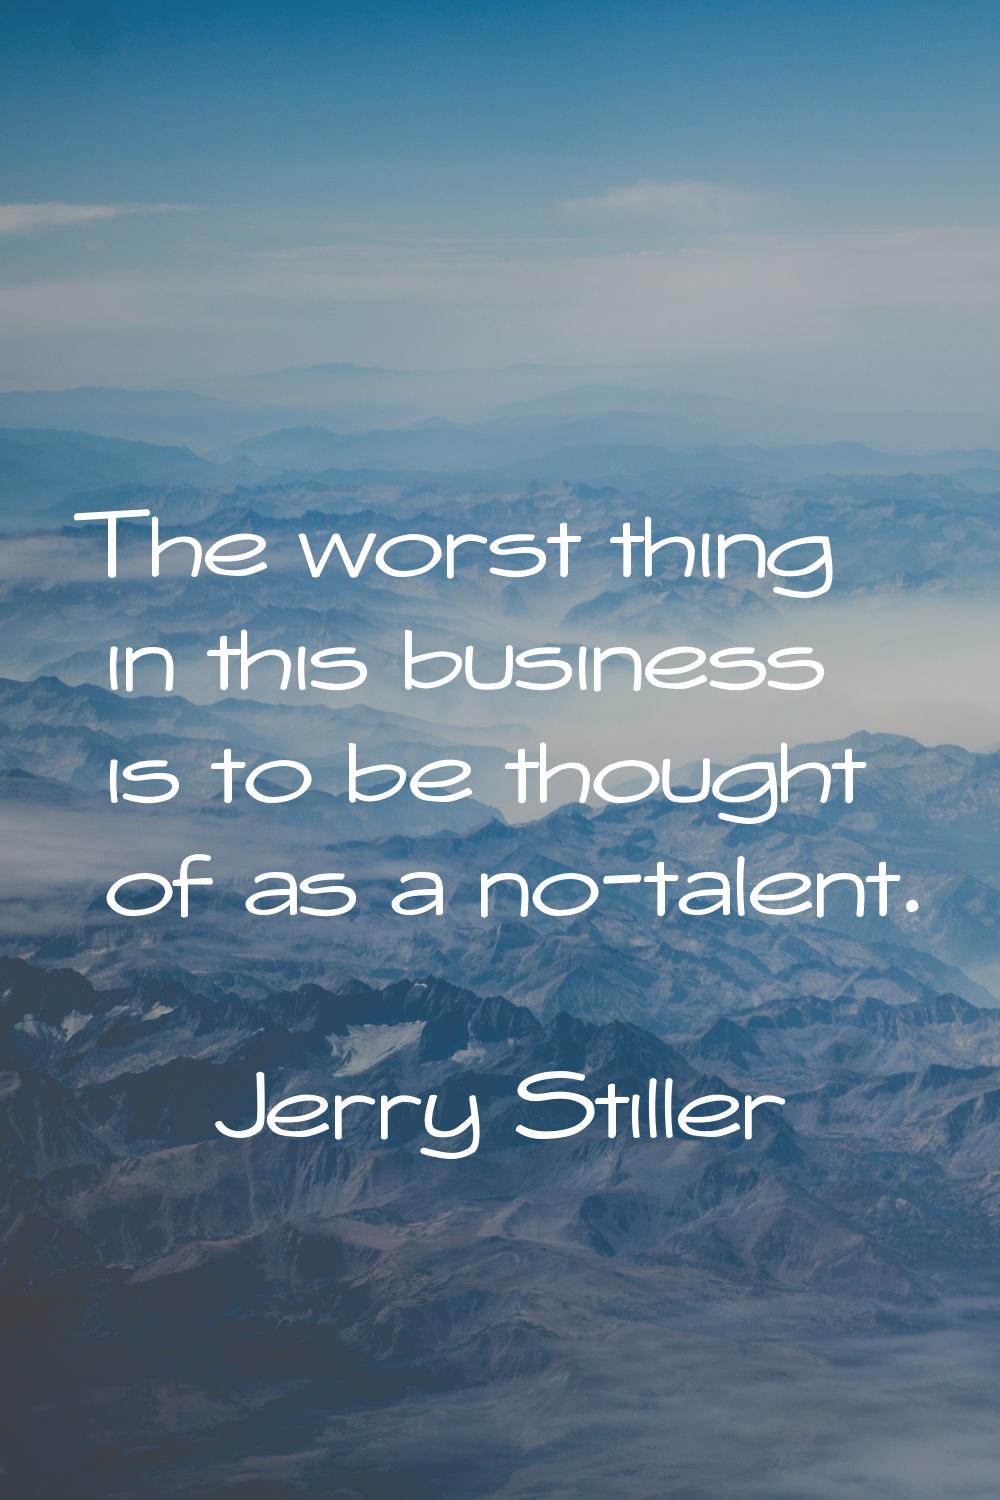 The worst thing in this business is to be thought of as a no-talent.